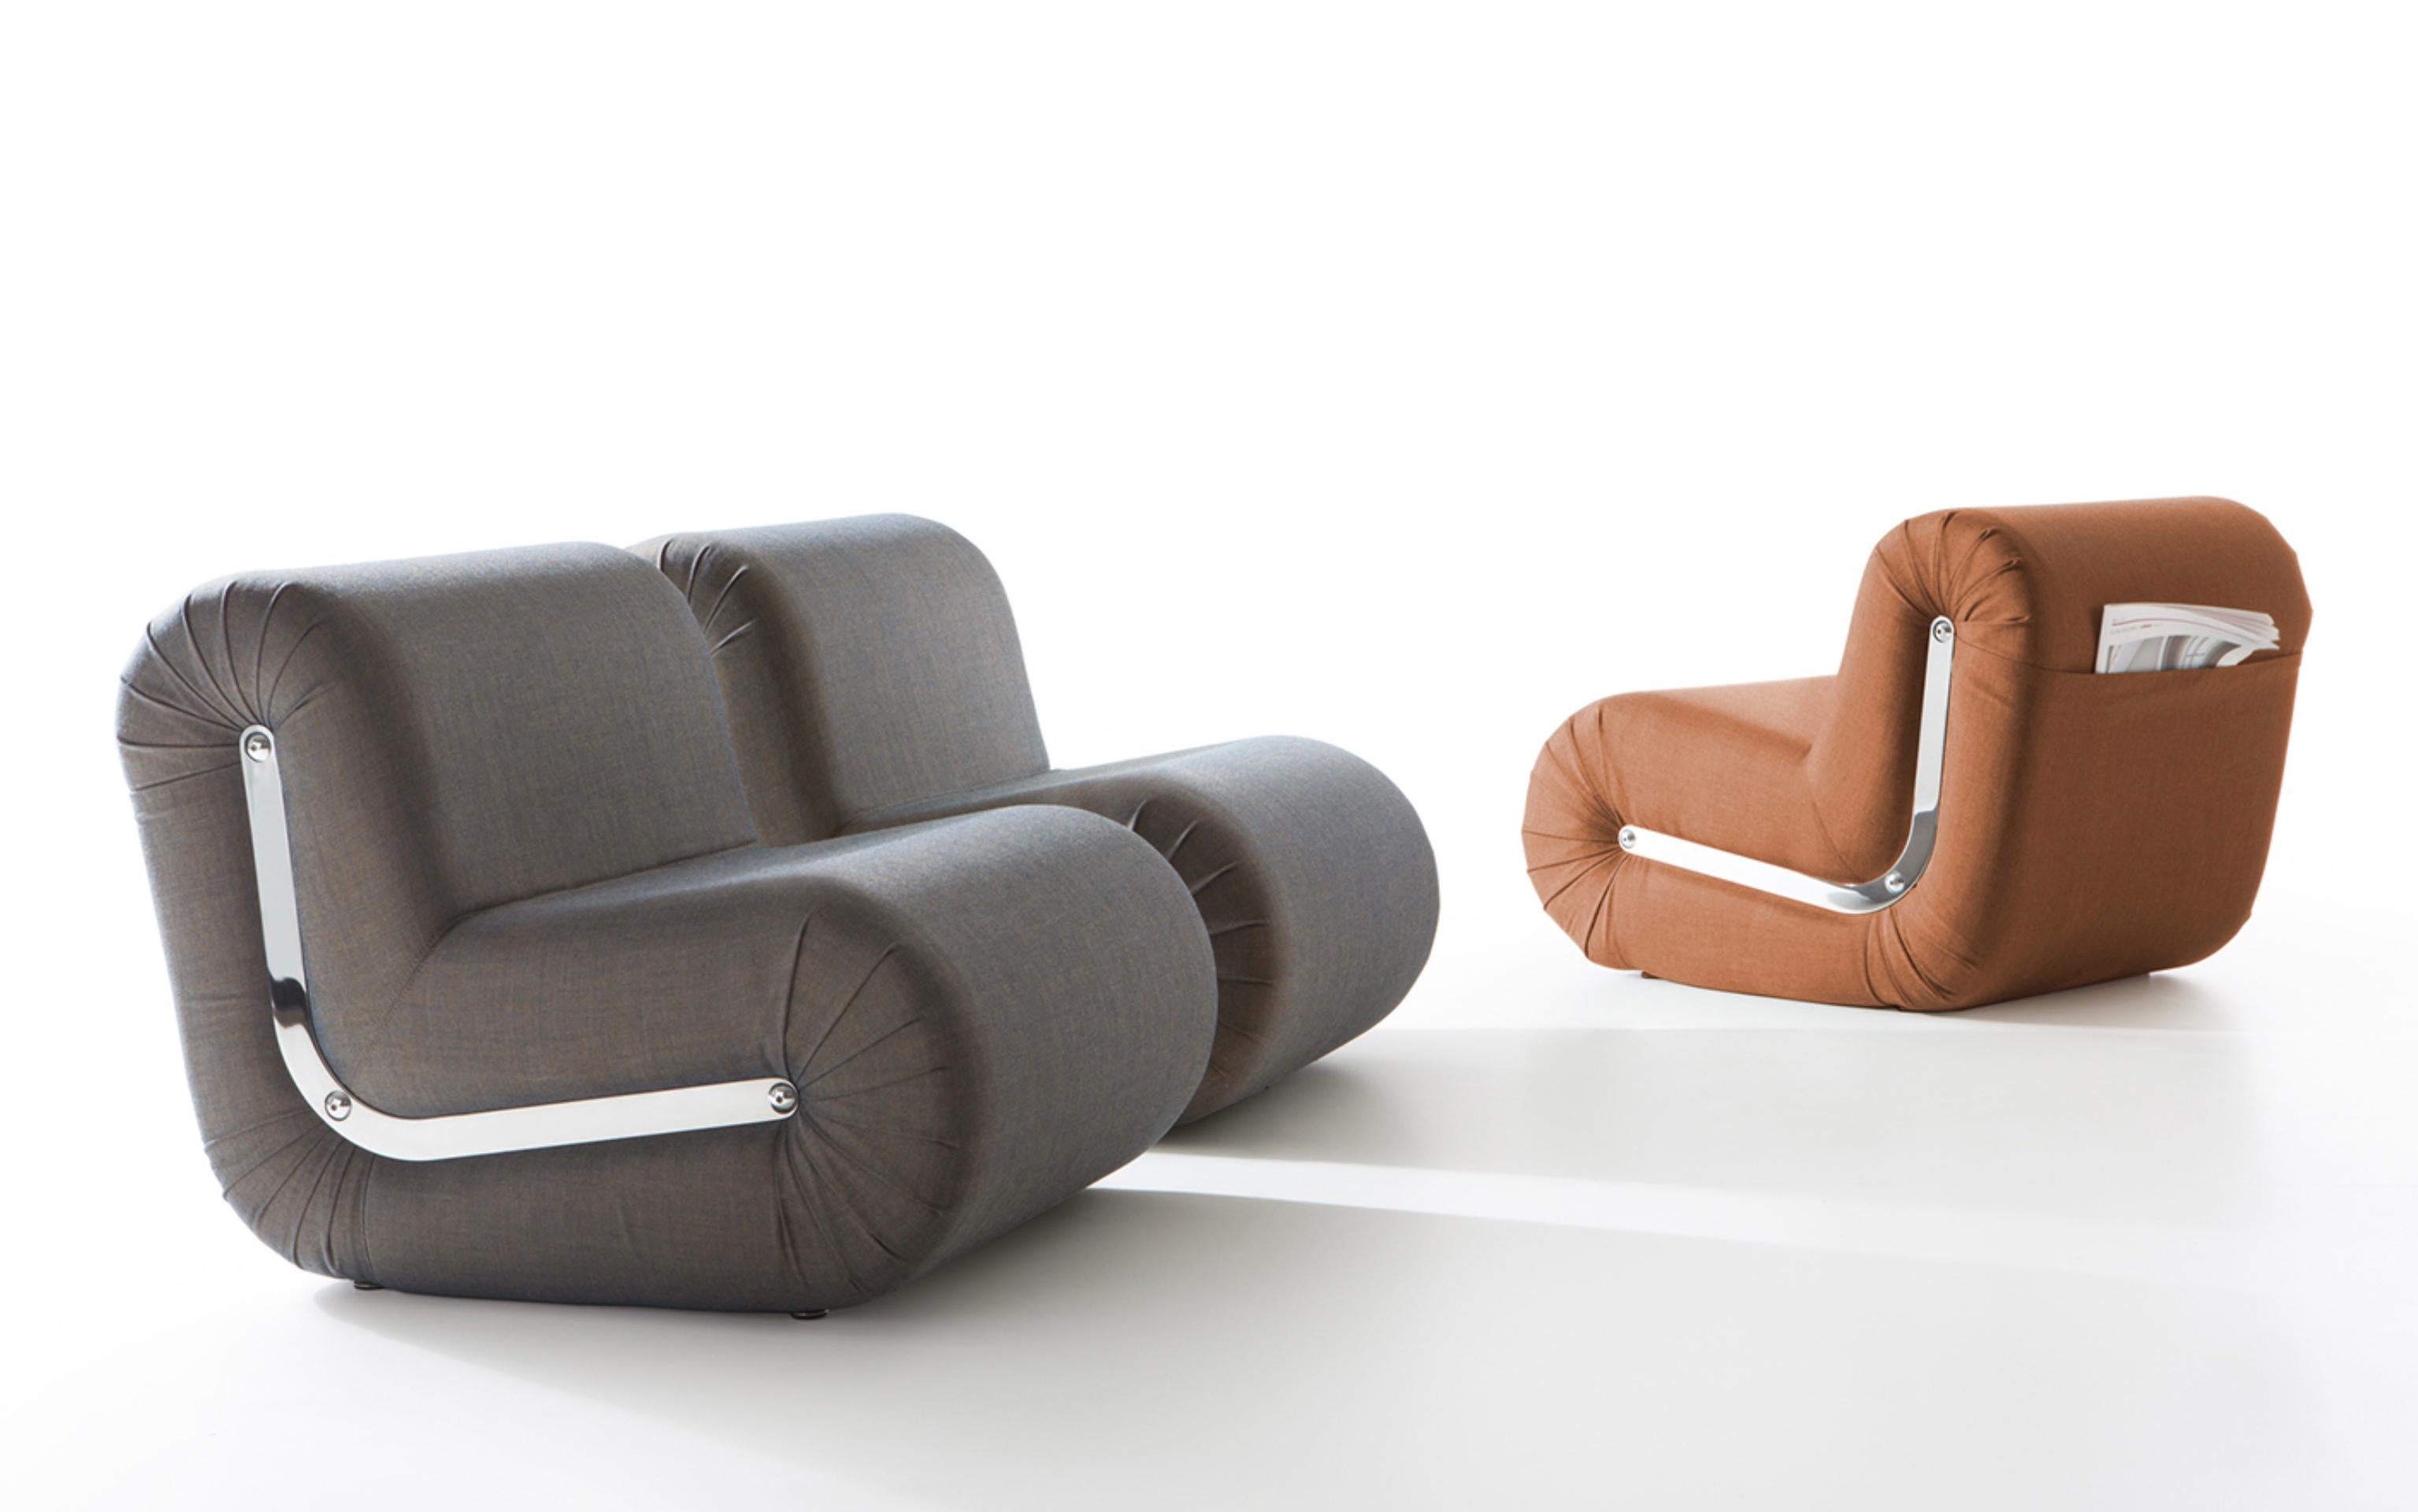 Rodolfo Bonetto set of 3 ‘Boomerang’ lounge chairs in 'Remix 3 by Kvadrat' 1968 for B-Line.

Boomerang is a welcoming lounge chair featuring a flat pocket at the back for use as magazine holder and is characterised by soft and essential lines. Its